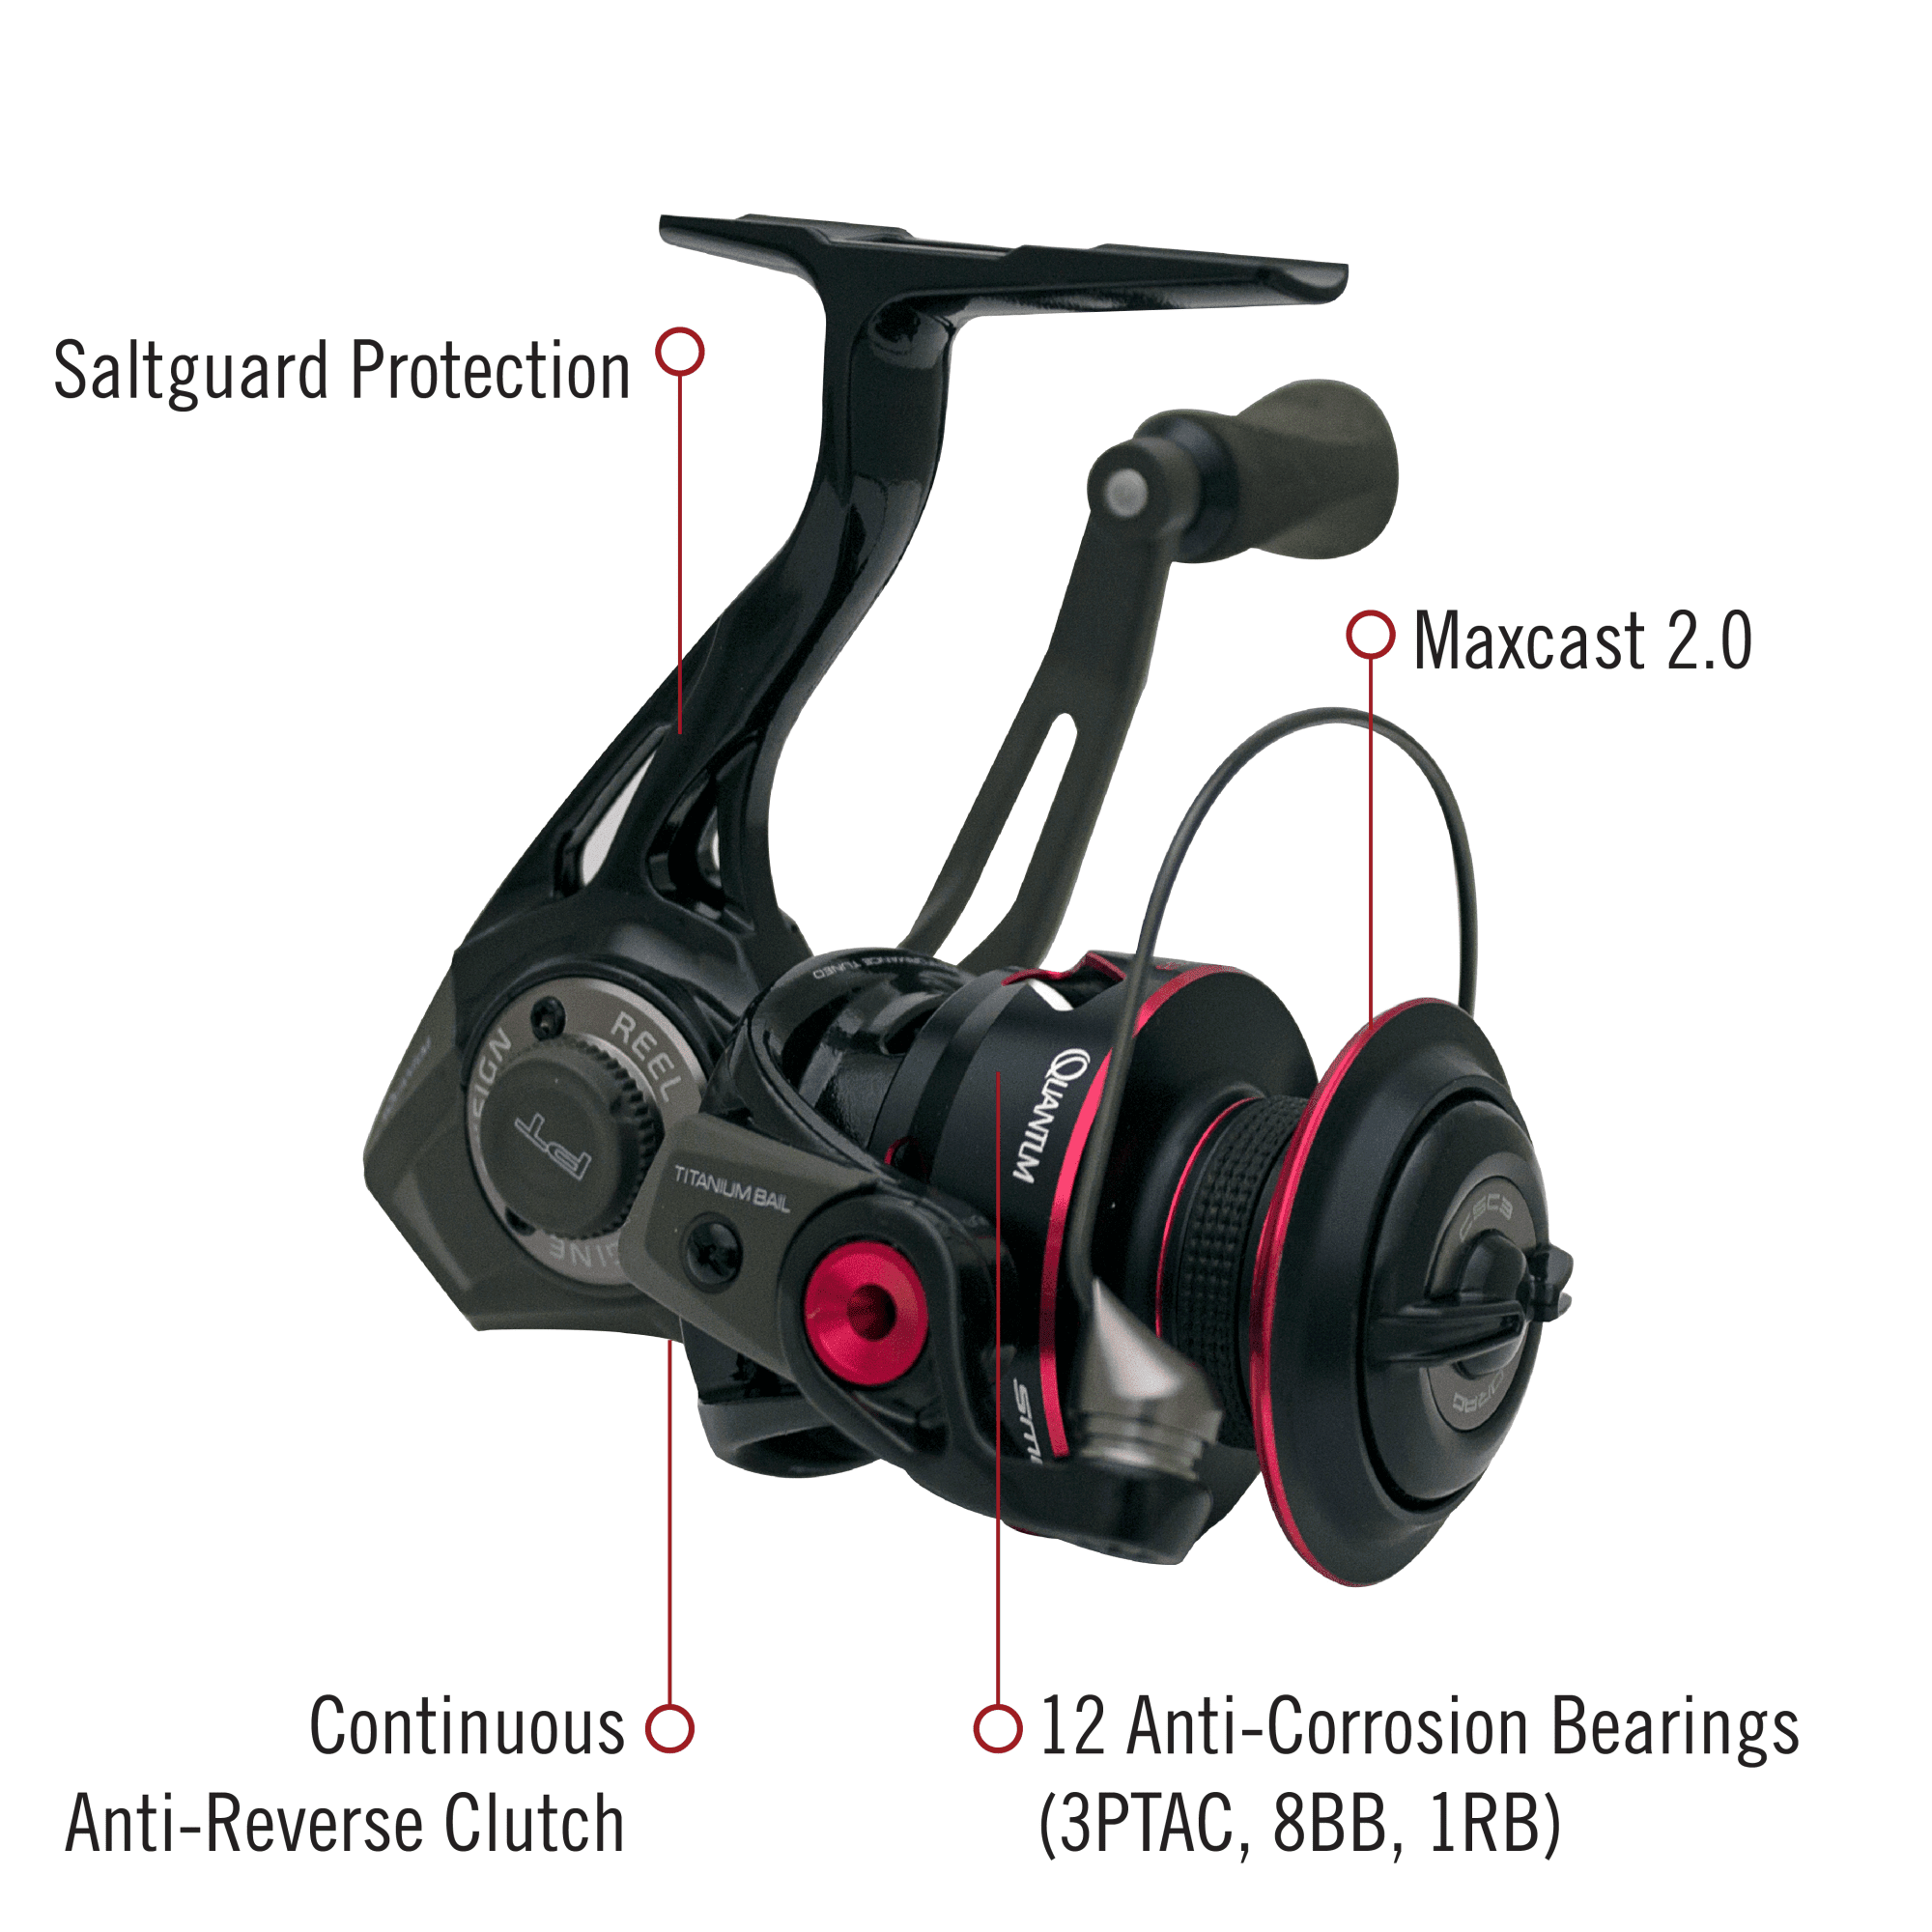 Quantum Smoke Spinning Fishing Reel, Size 30 Reel, Changeable Right- or  Left-Hand Retrieve, Continuous Anti-Reverse Clutch with NiTi Indestructible  Bail, SCR Alloy Frame, 6.0:1 Gear Ratio, Black 